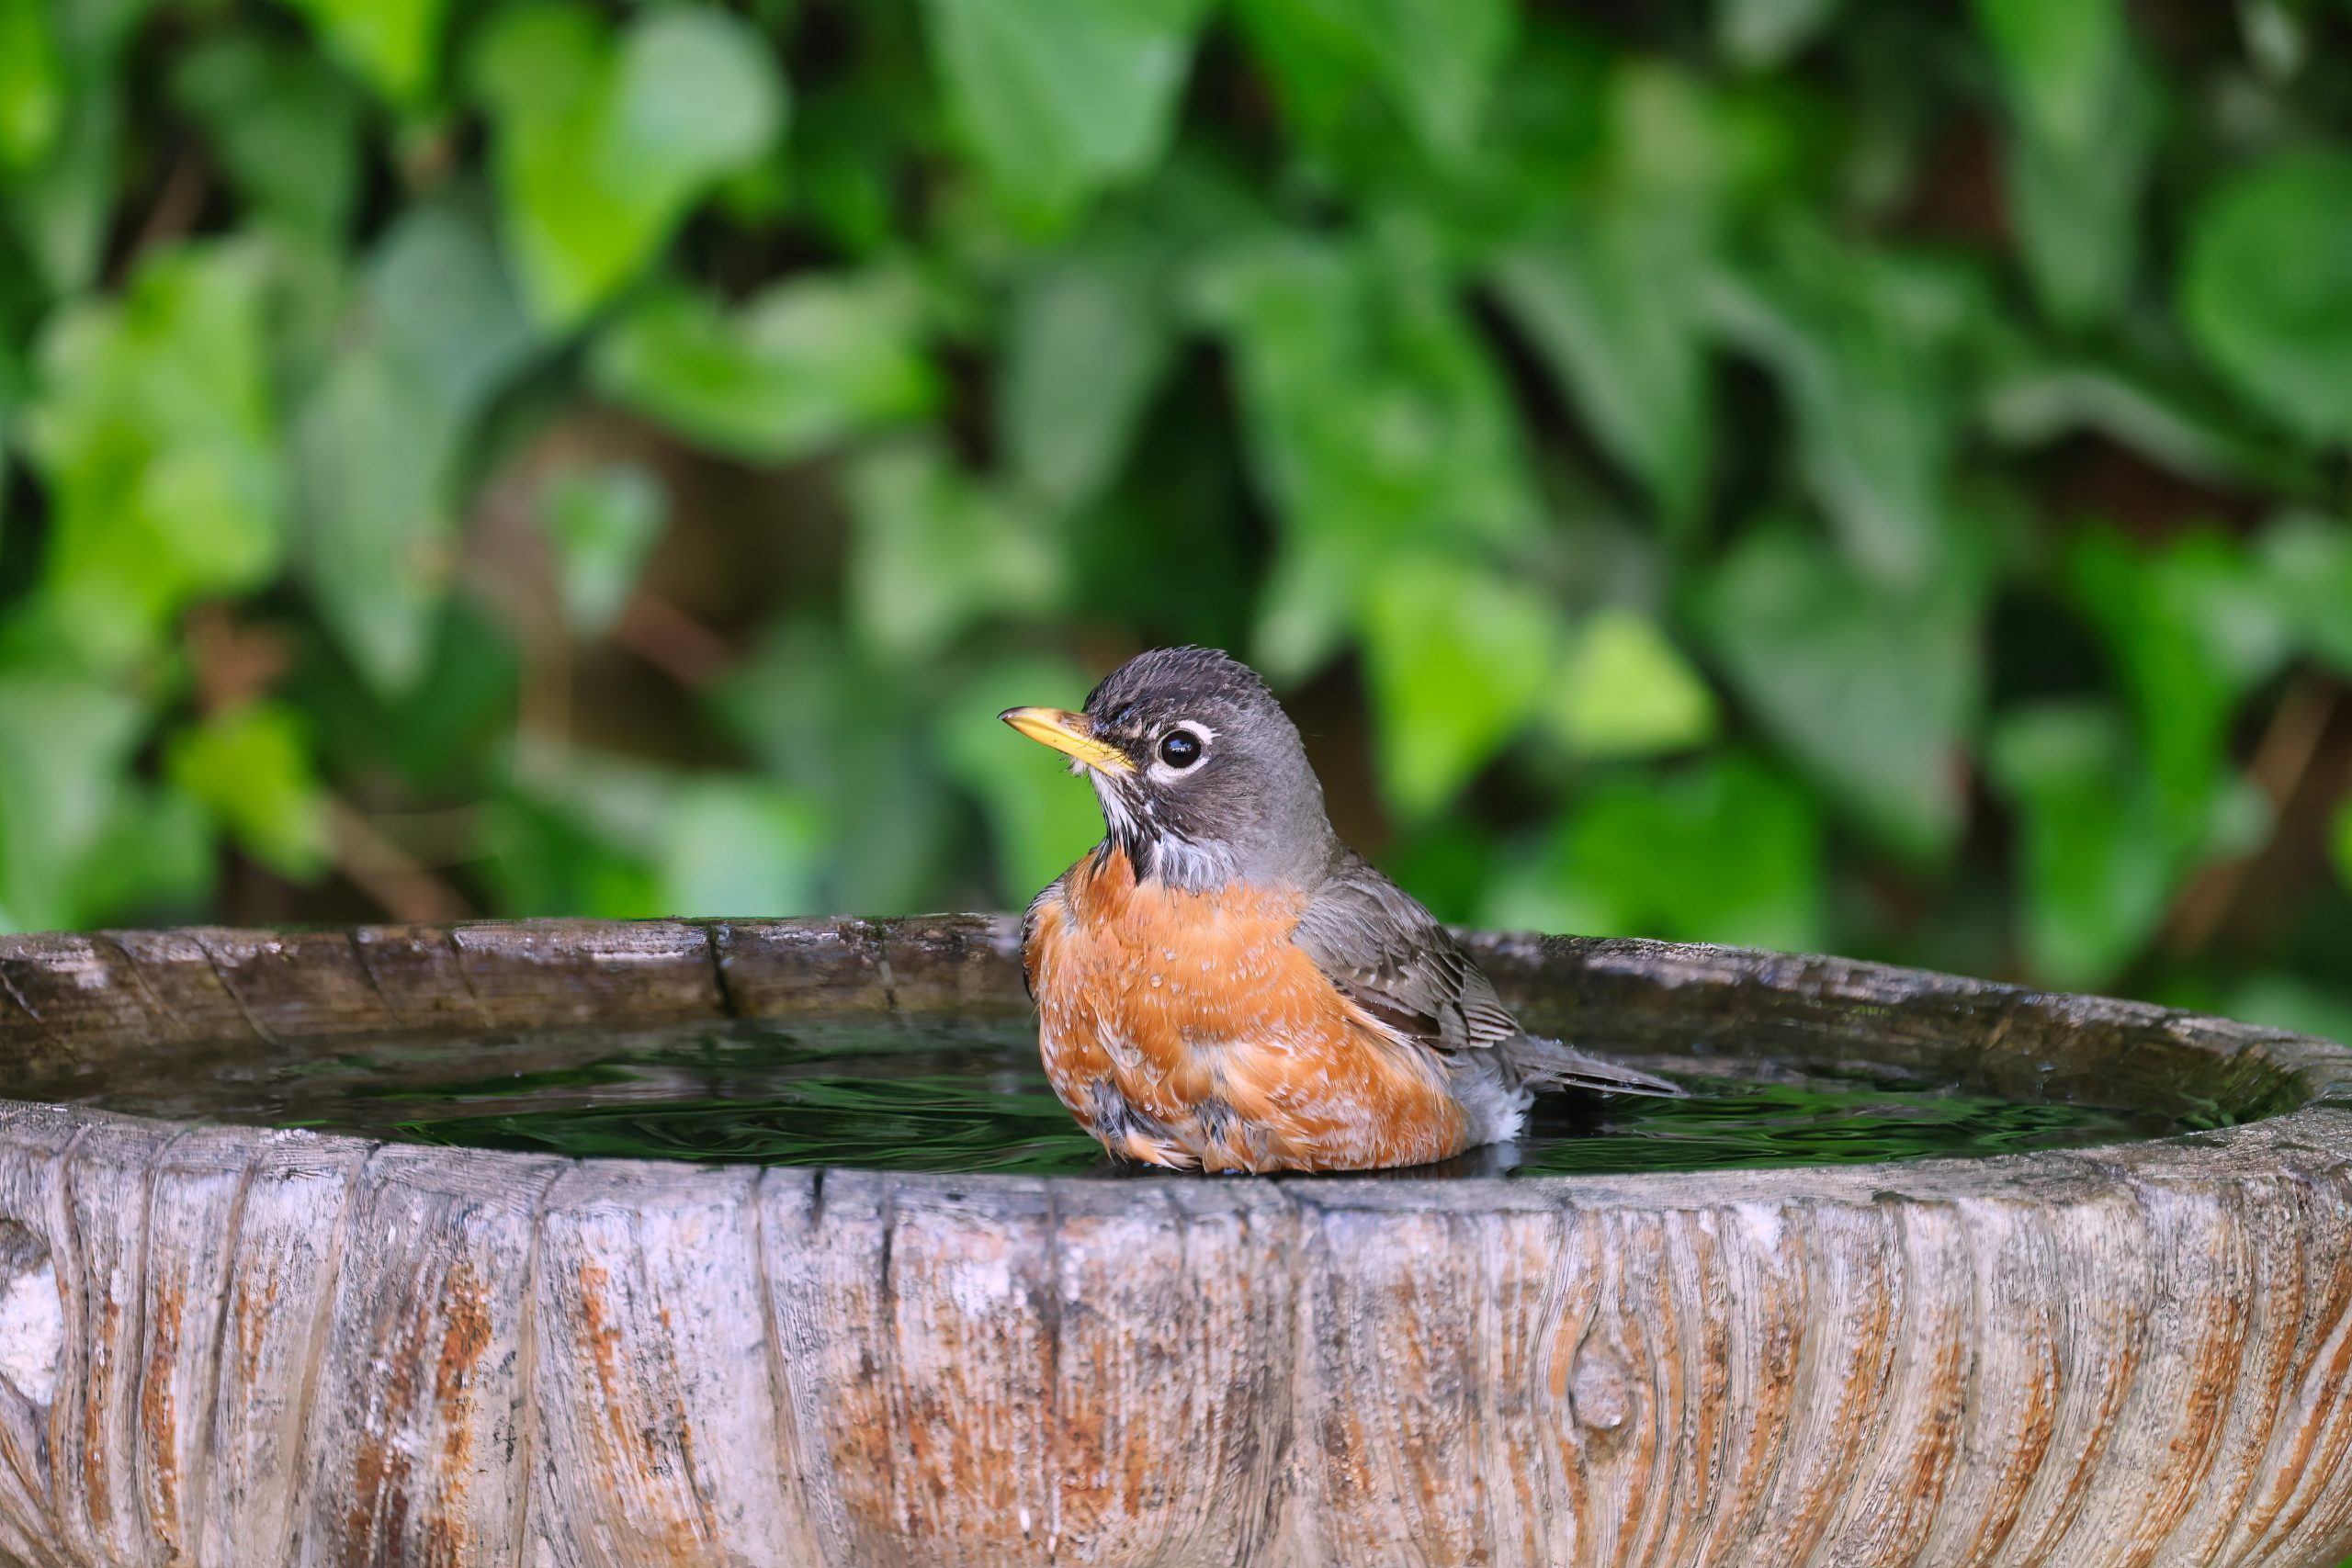 How To Attract More Birds Into Your Garden or Outdoor Space